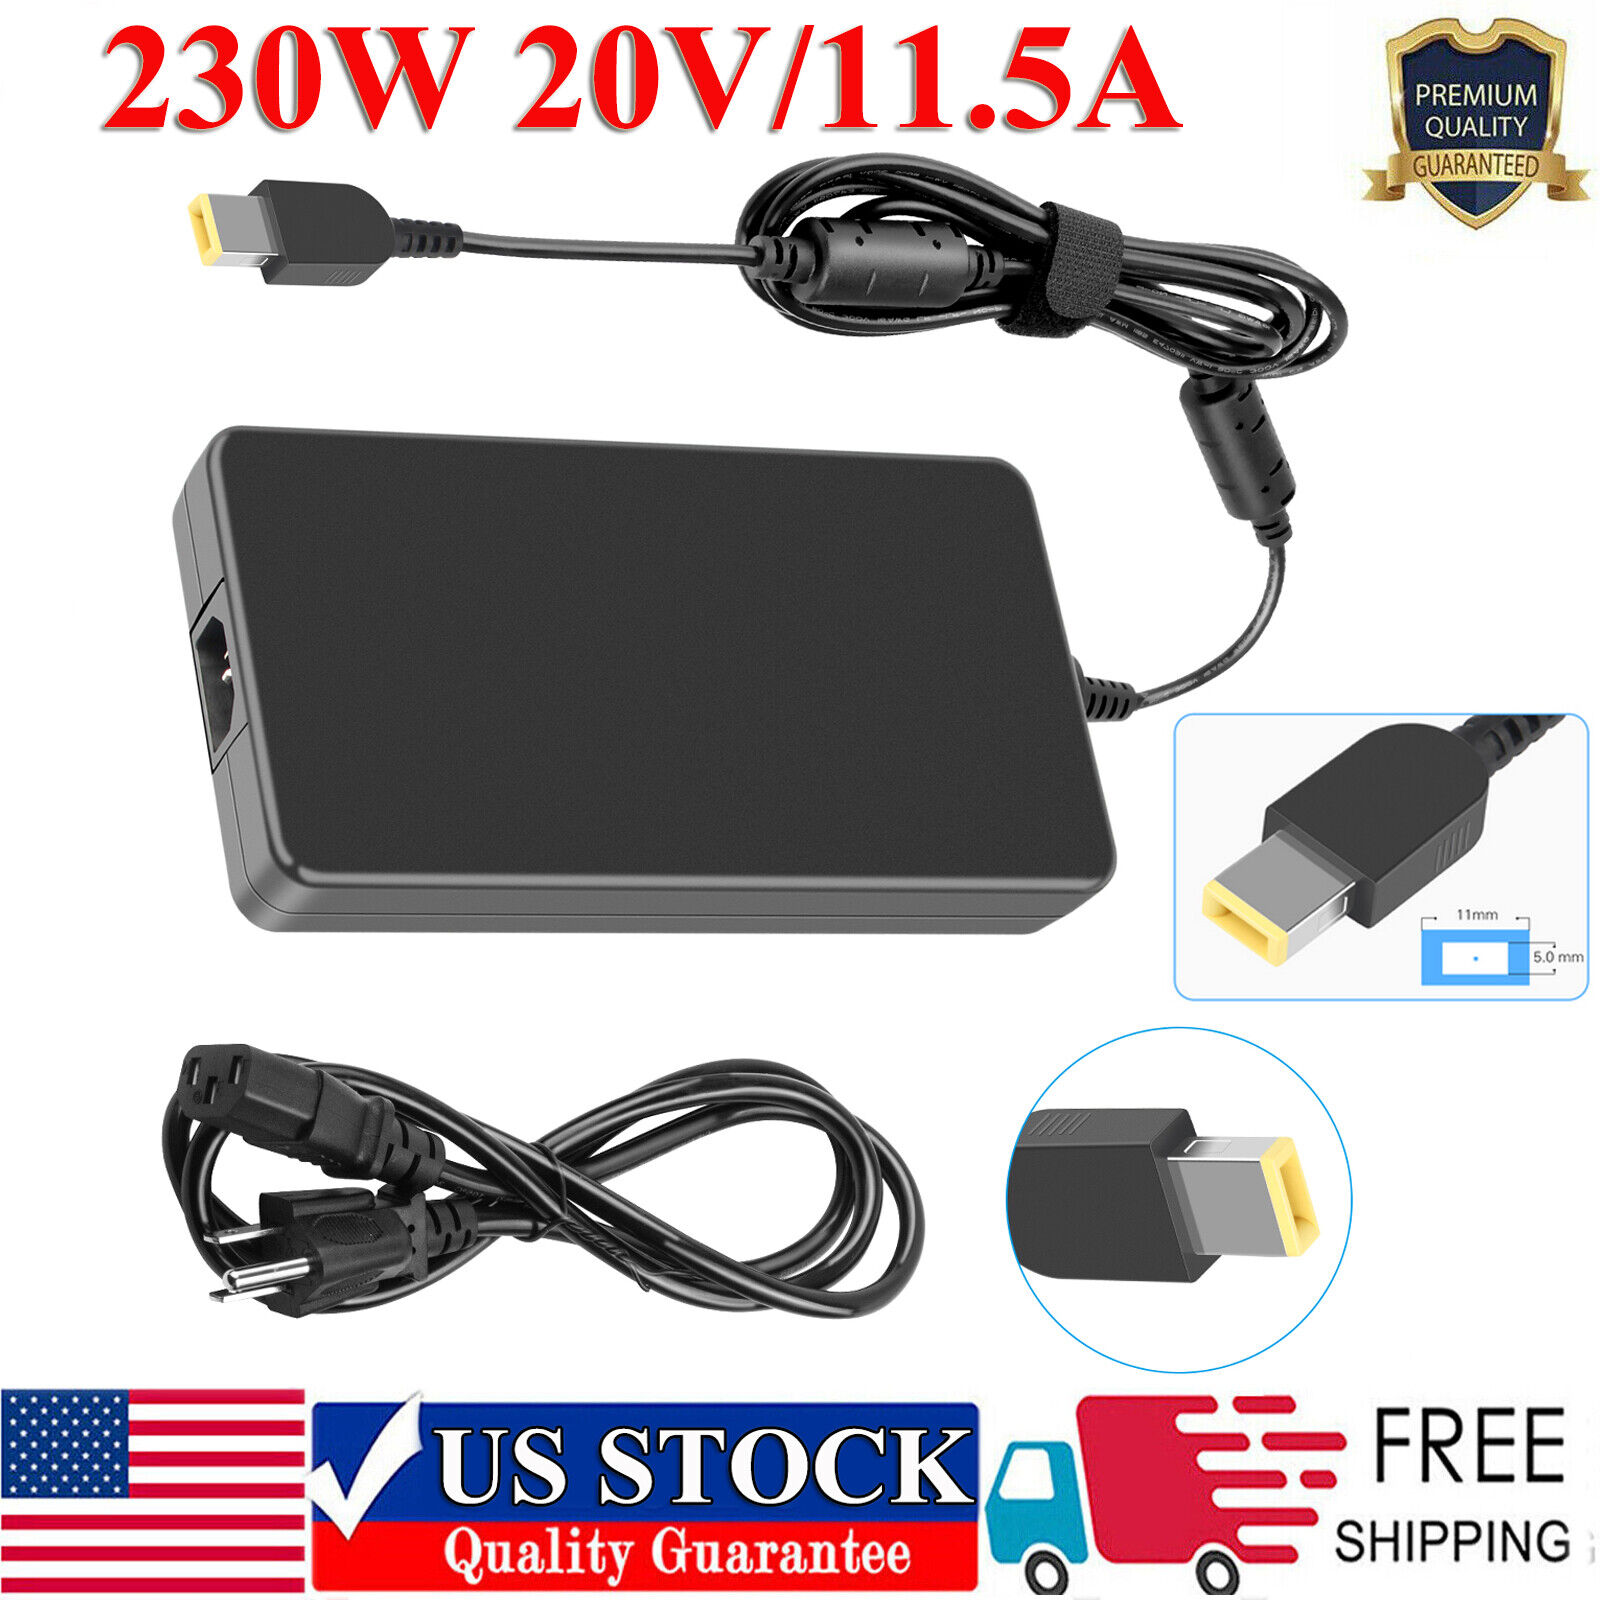 230W Power Adapter Charger for Lenovo ThinkPad P50 P51 P52 P70 P71 P73 W540 W541